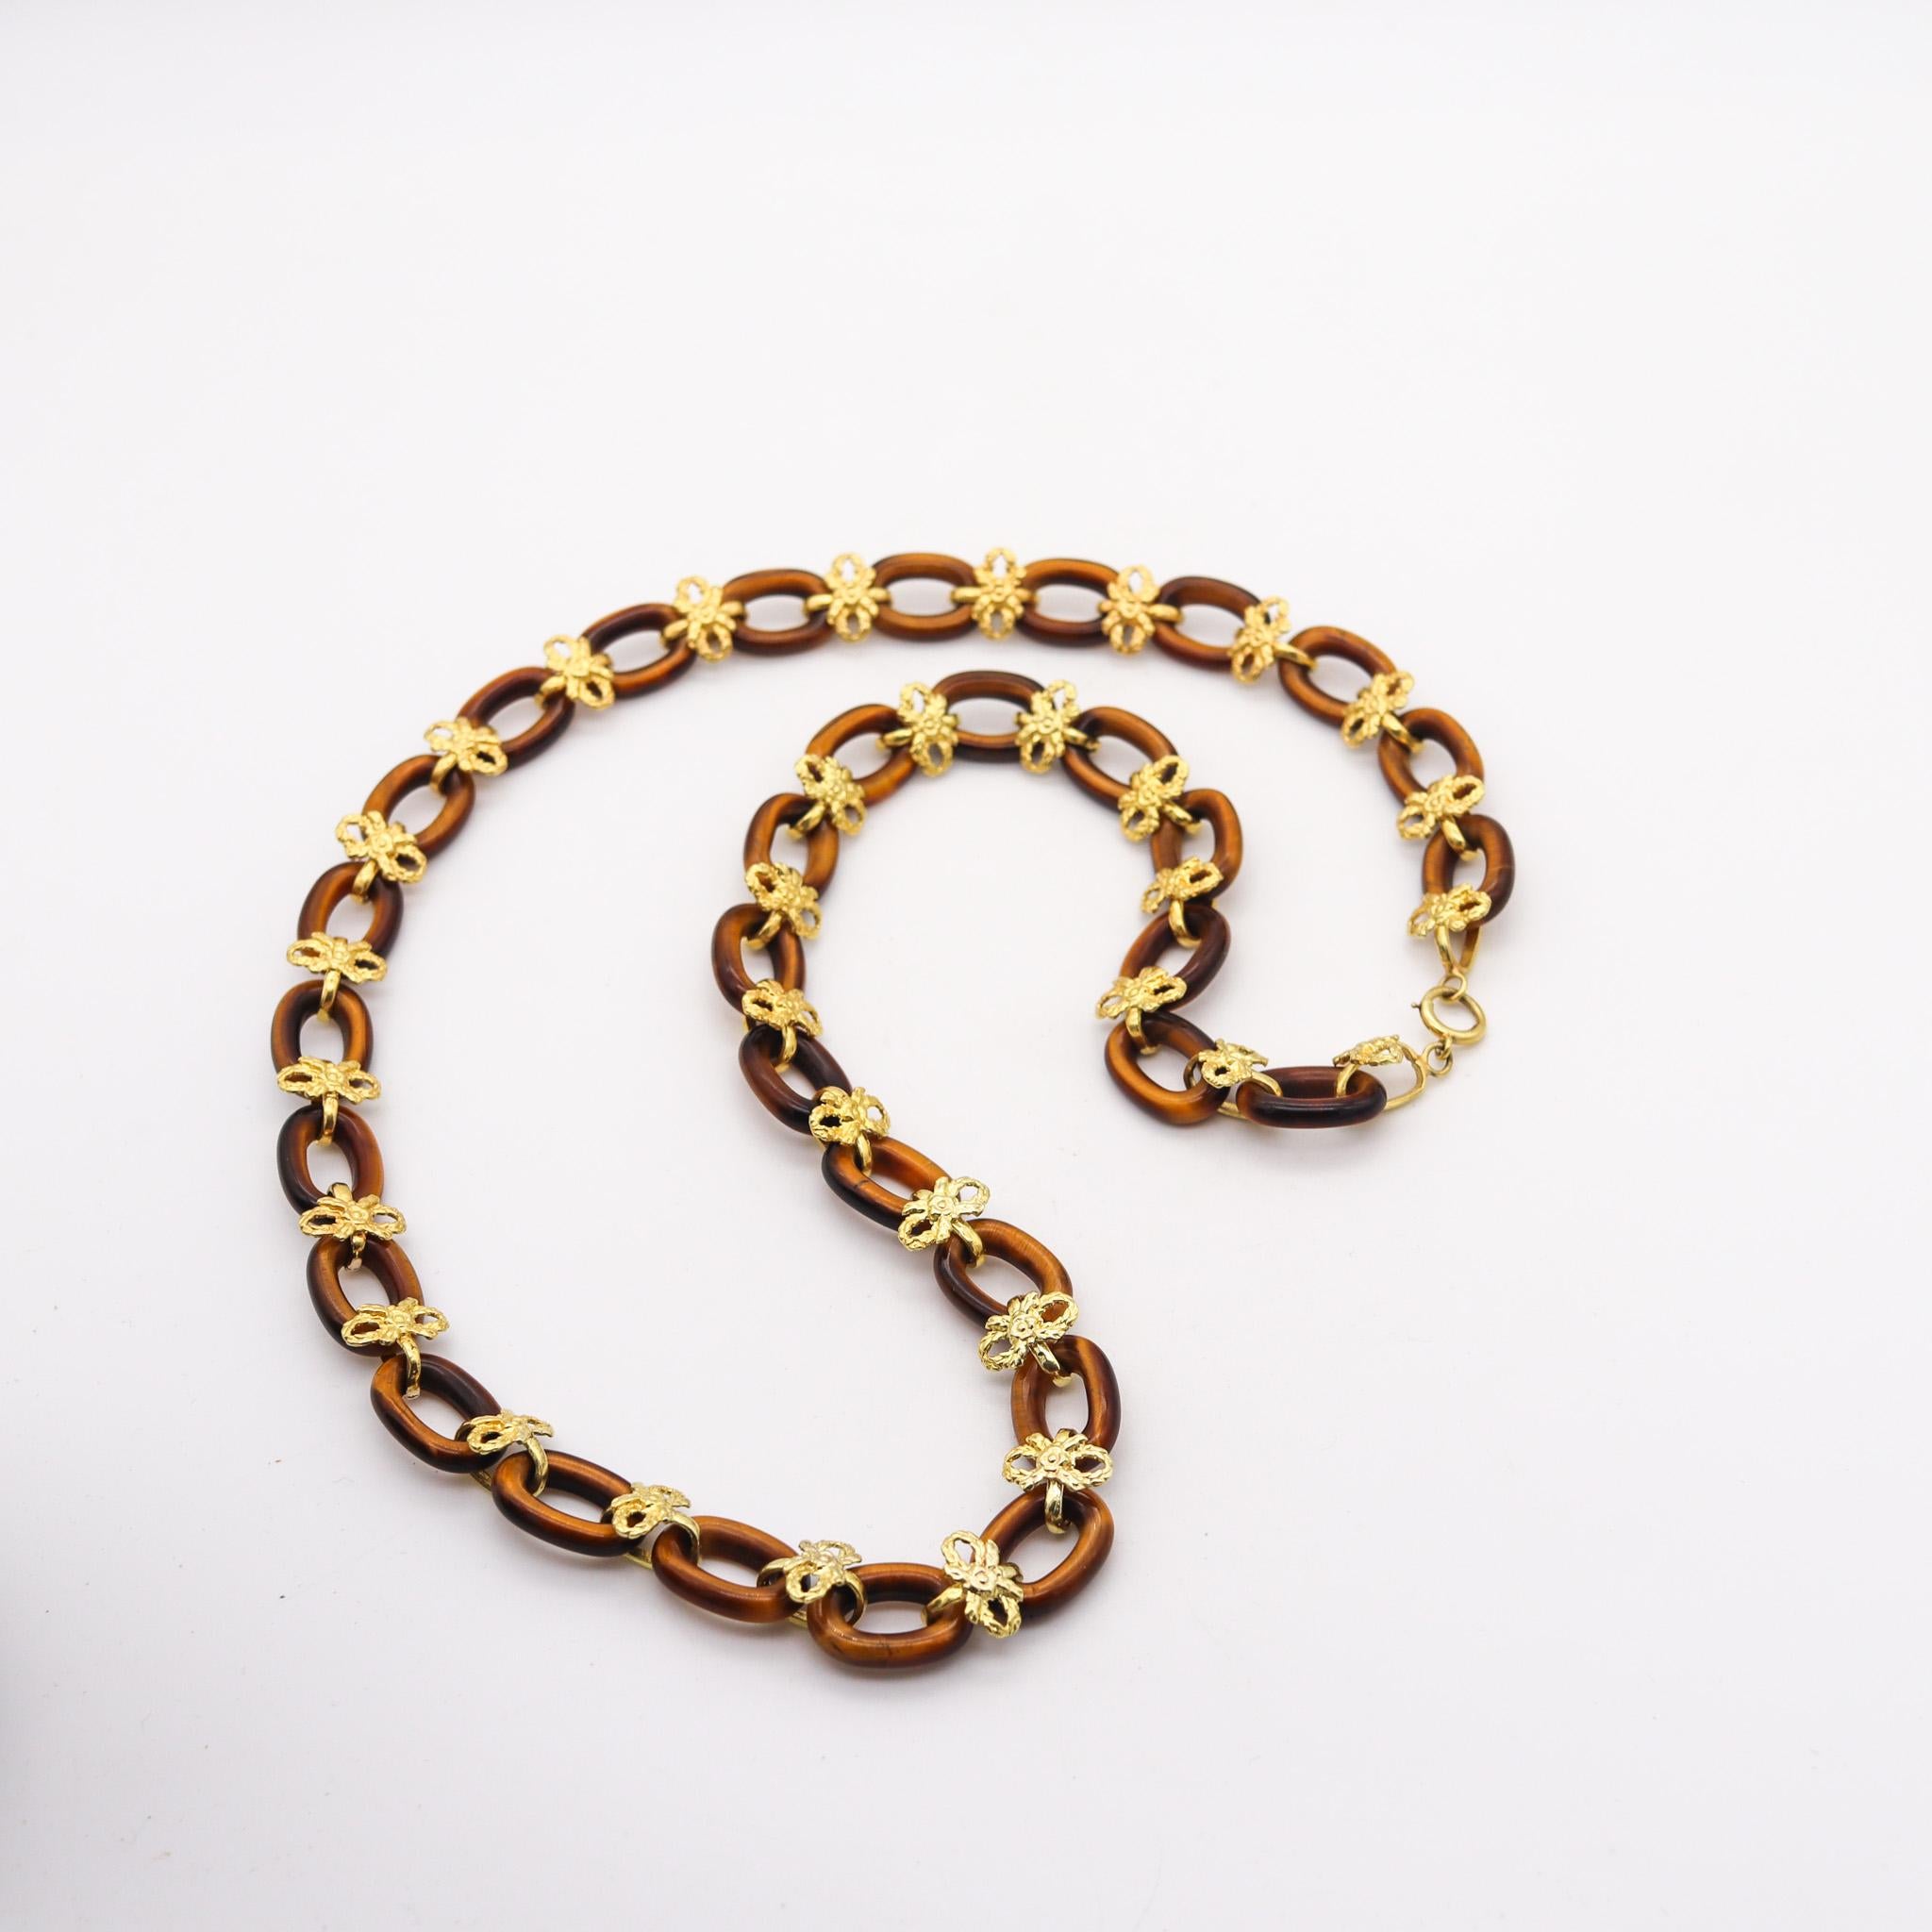 Modernist Italian 1960 Mid Century Long Sautoir Necklace In 14Kt Yellow Gold & Tiger Eye For Sale